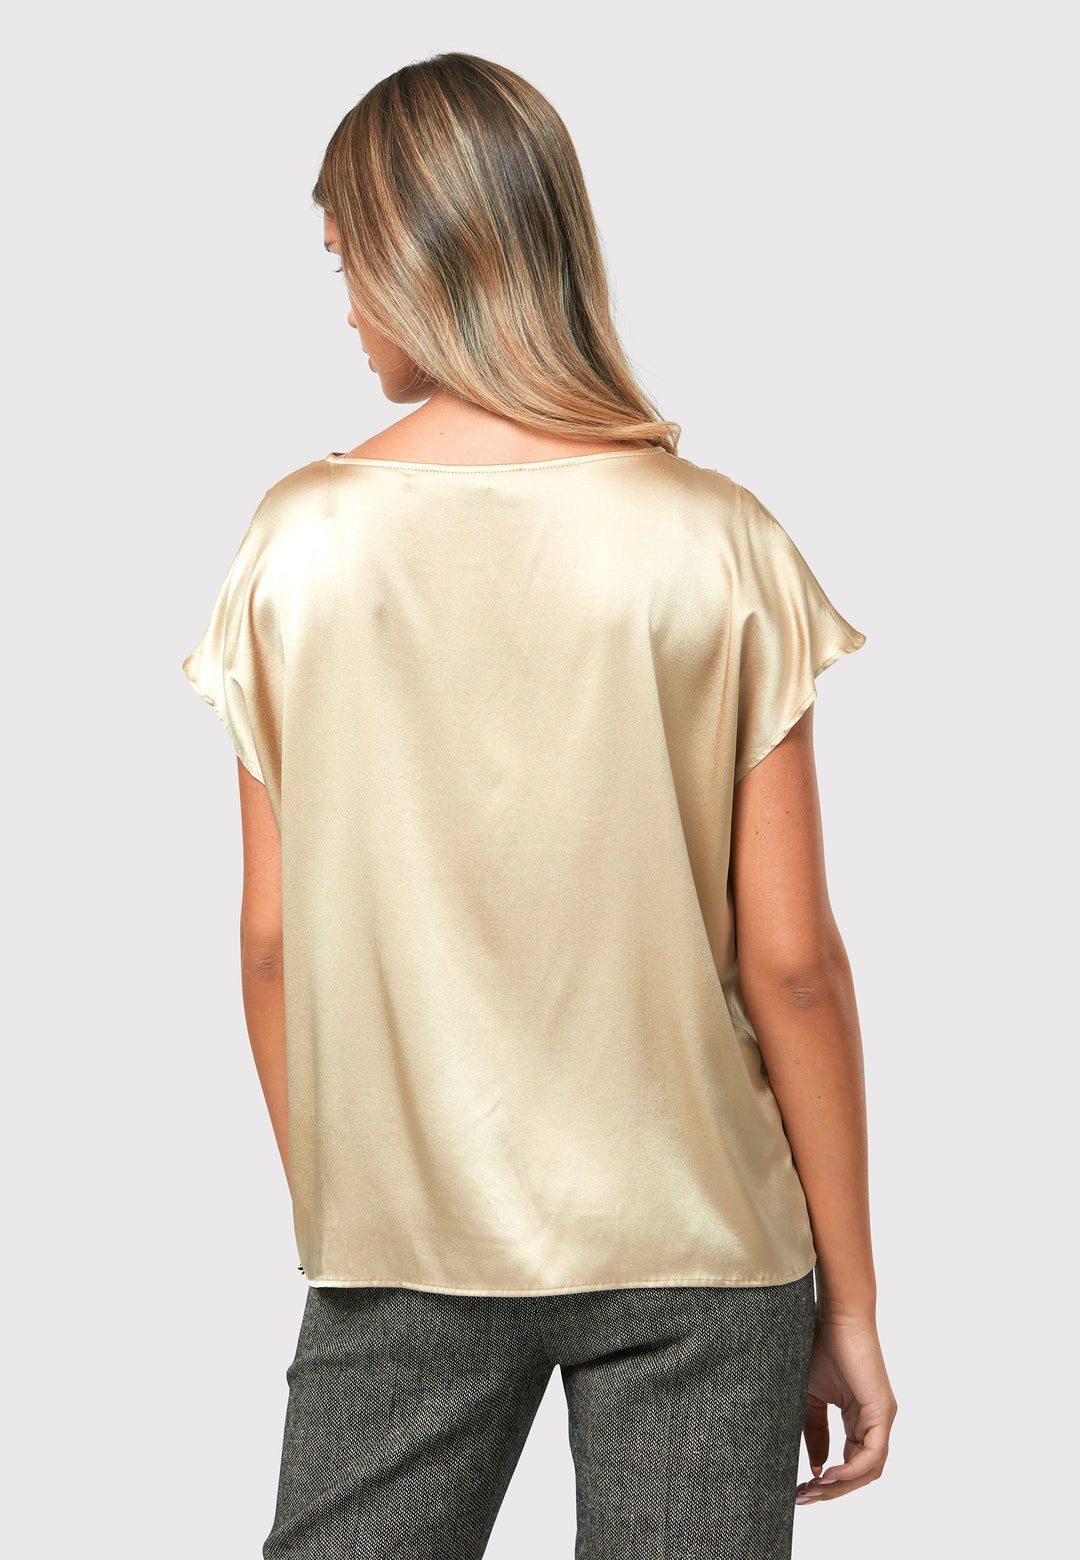 Lucy gold shell top, a luxurious and versatile addition to your wardrobe. Crafted from a lux silk blend, this exquisite top offers a sumptuous feel against your skin.